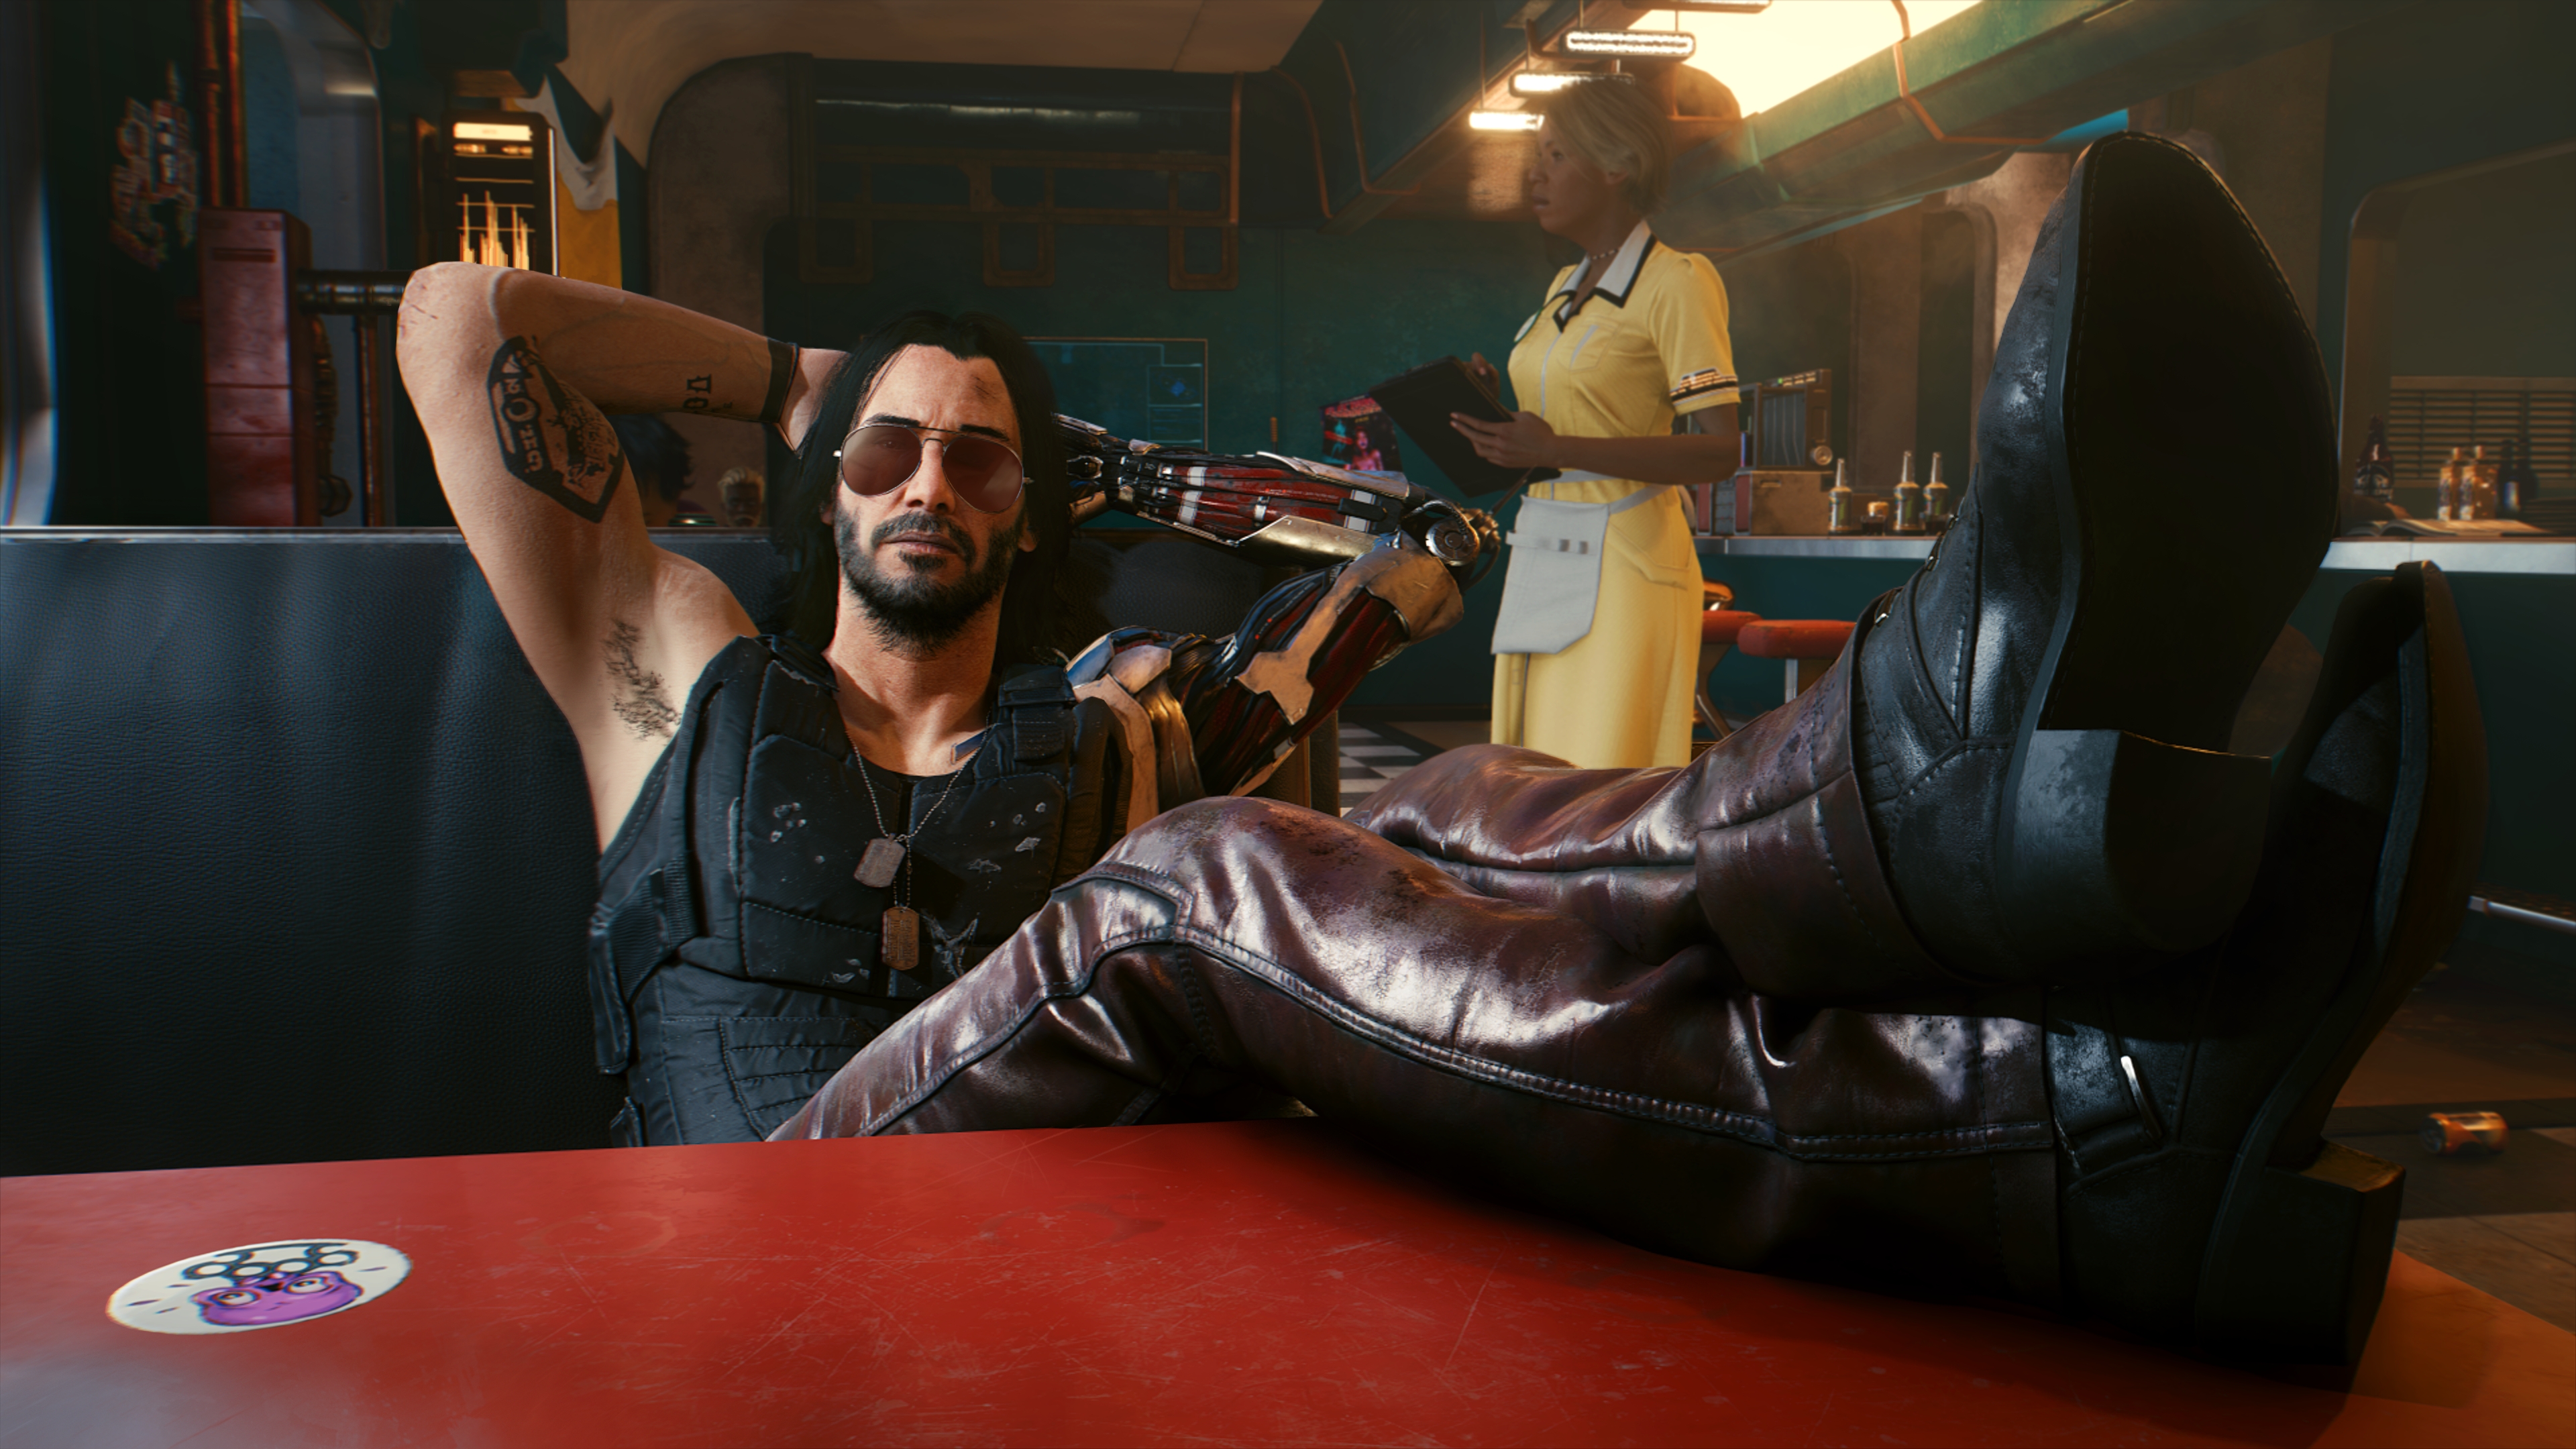 General 3840x2160 video games Cyberpunk 2077 Johnny Silverhand Keanu Reeves bar CD Projekt RED video game characters men PC gaming inked men men with shades screen shot